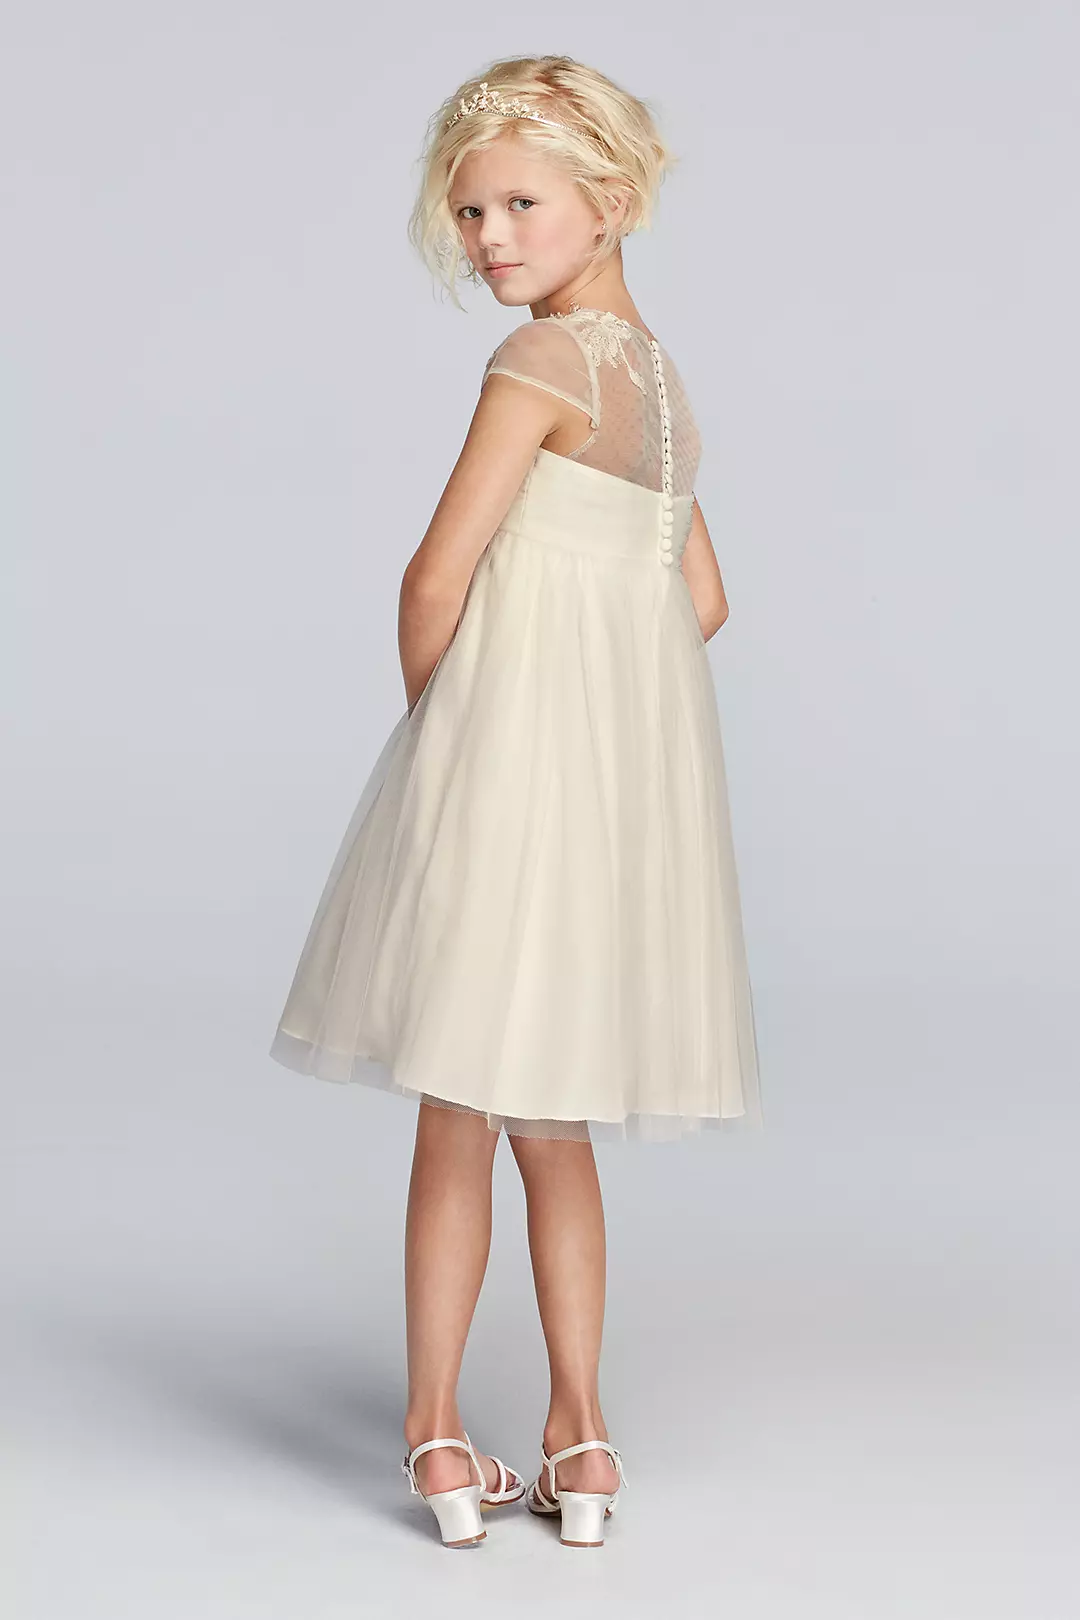 As-Is Mesh Flower Girl Dress with Illusion Necklin Image 2